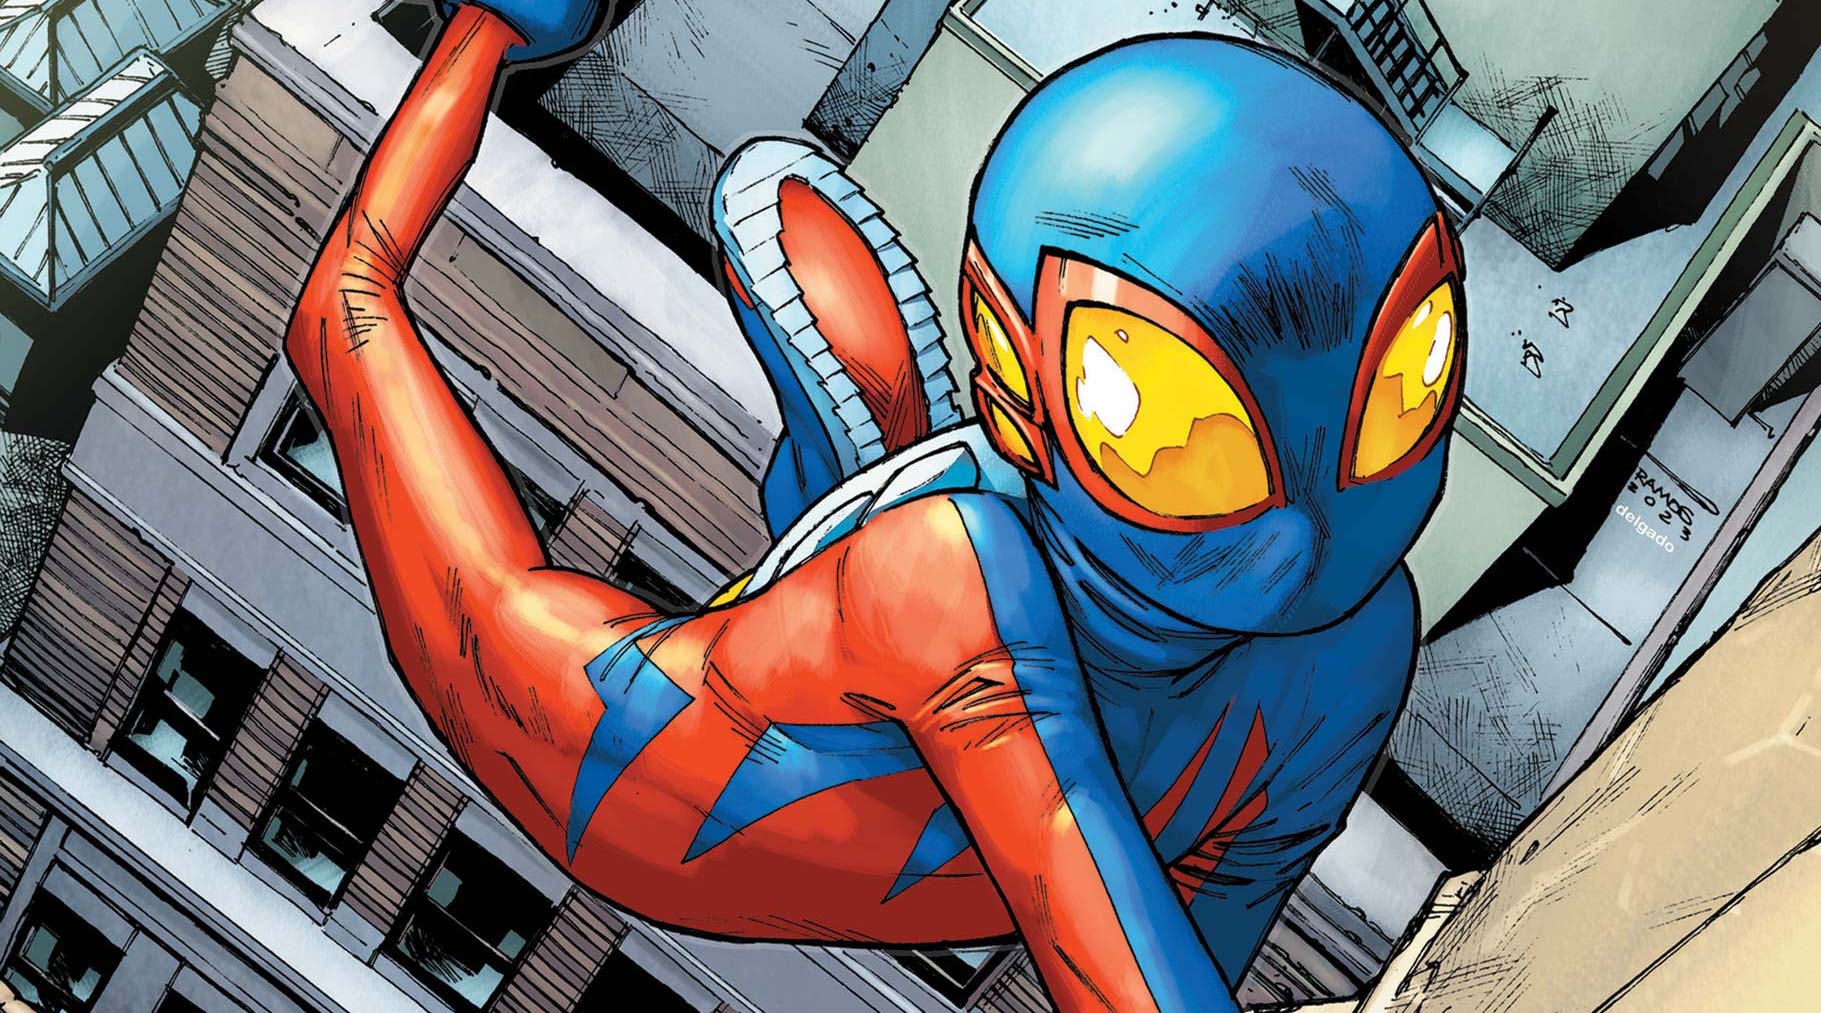 'Spider-Boy' #1 is a vibrant fresh and quirky start